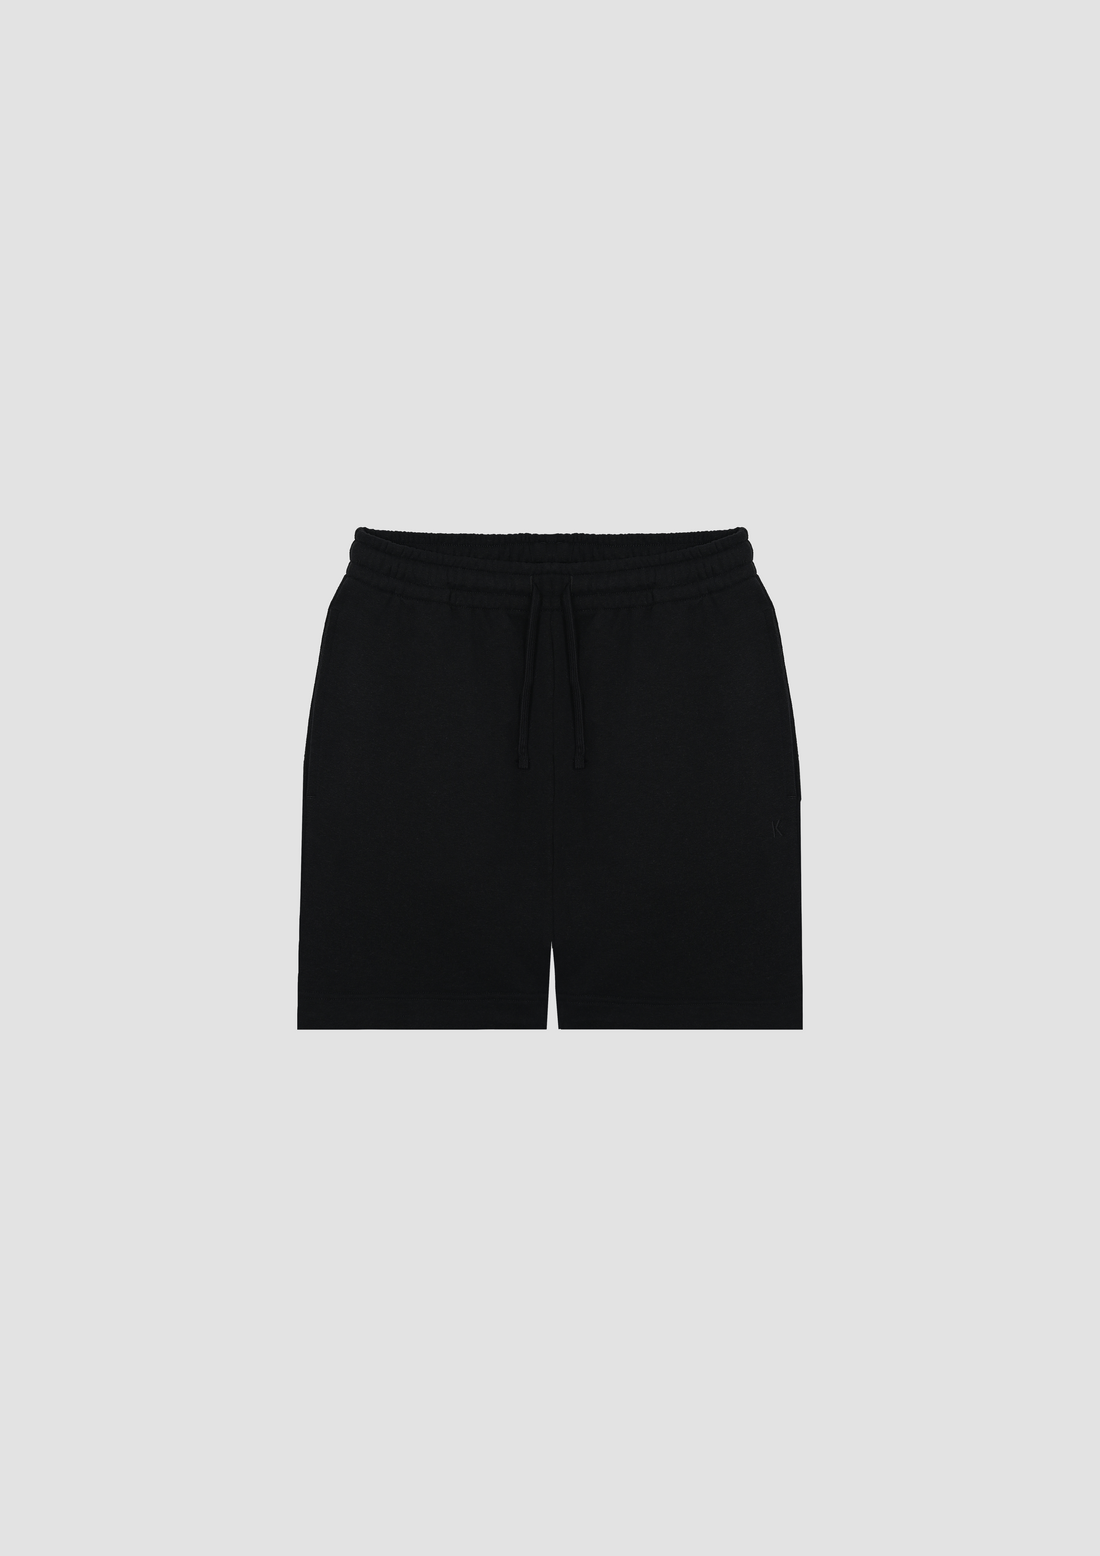 Lennox Shorts in Recycled Cotton, TENCEL™ Lyocell, TENCEL™ Recycled Lyocell and Recycled Linen in Black